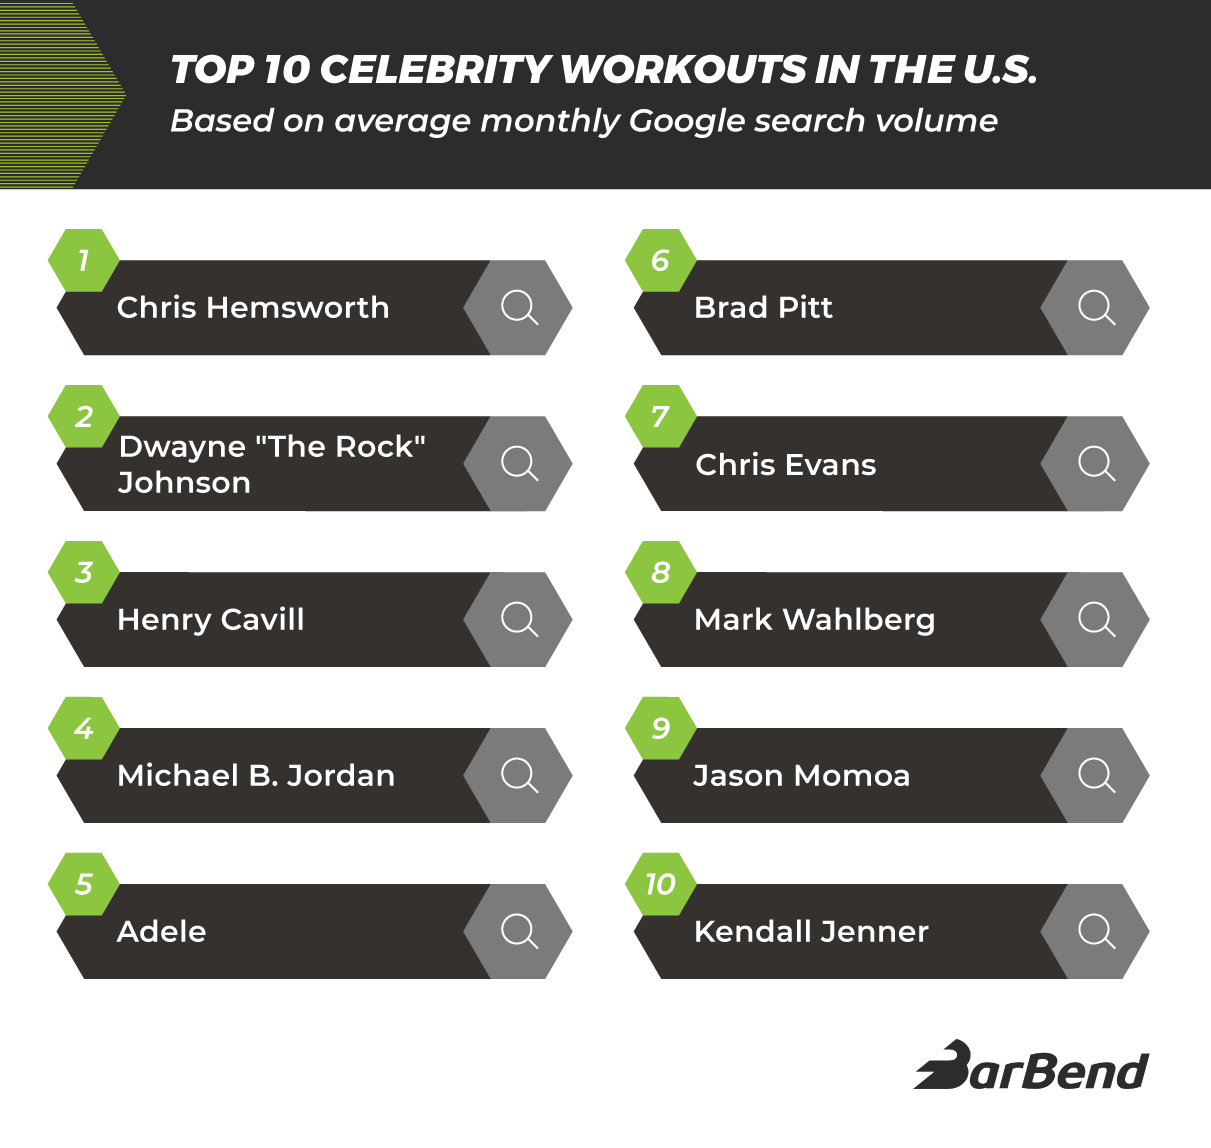 Top 10 celebrity workouts in the United States, based on average monthly Google search volume.